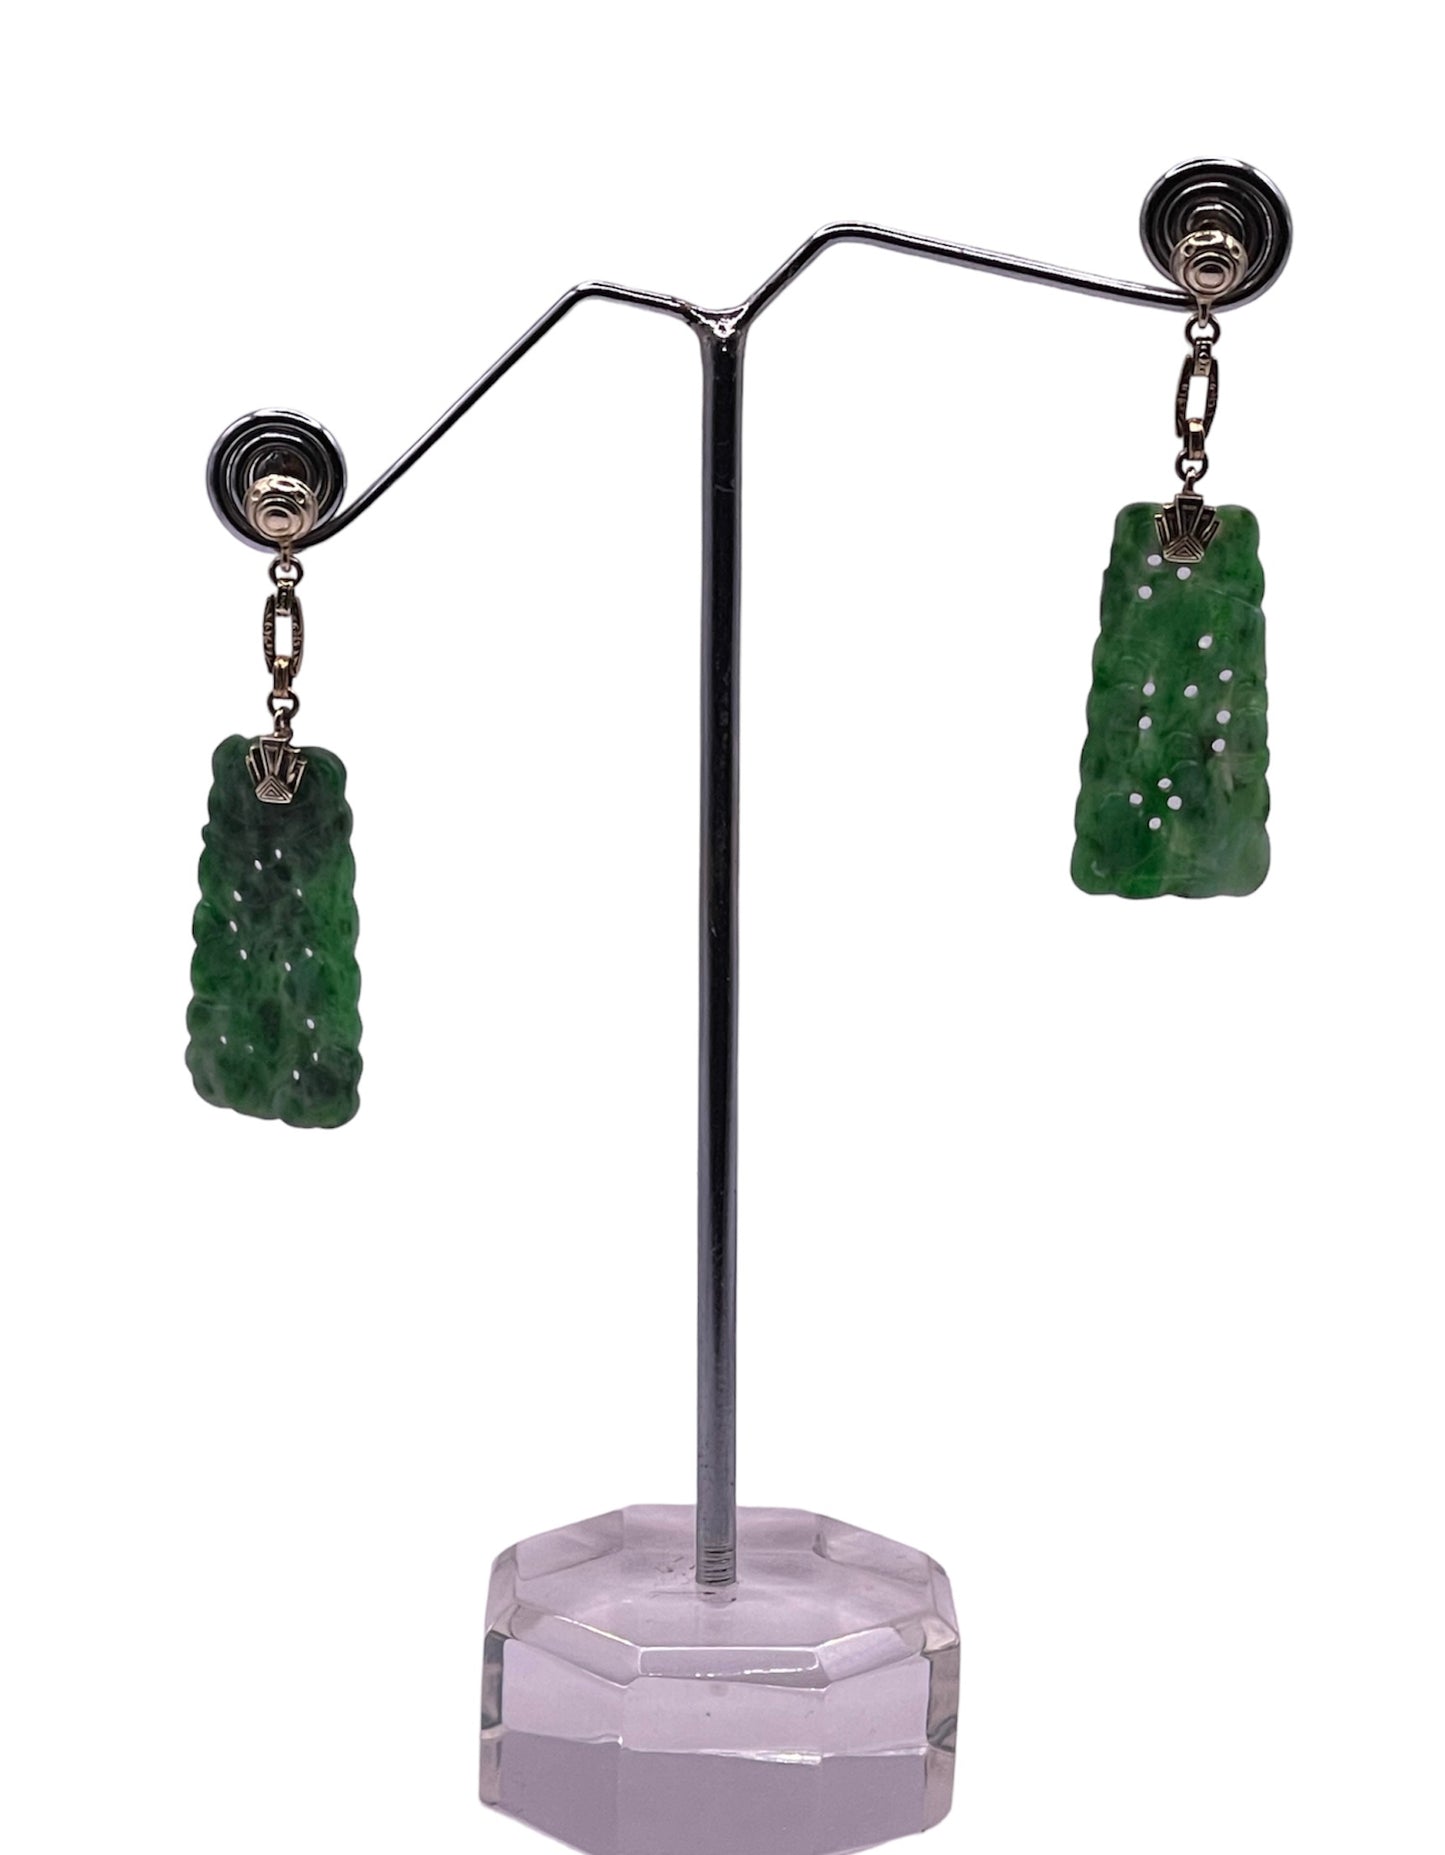 A vintage 1920s 14kt gold and dangling jade earring